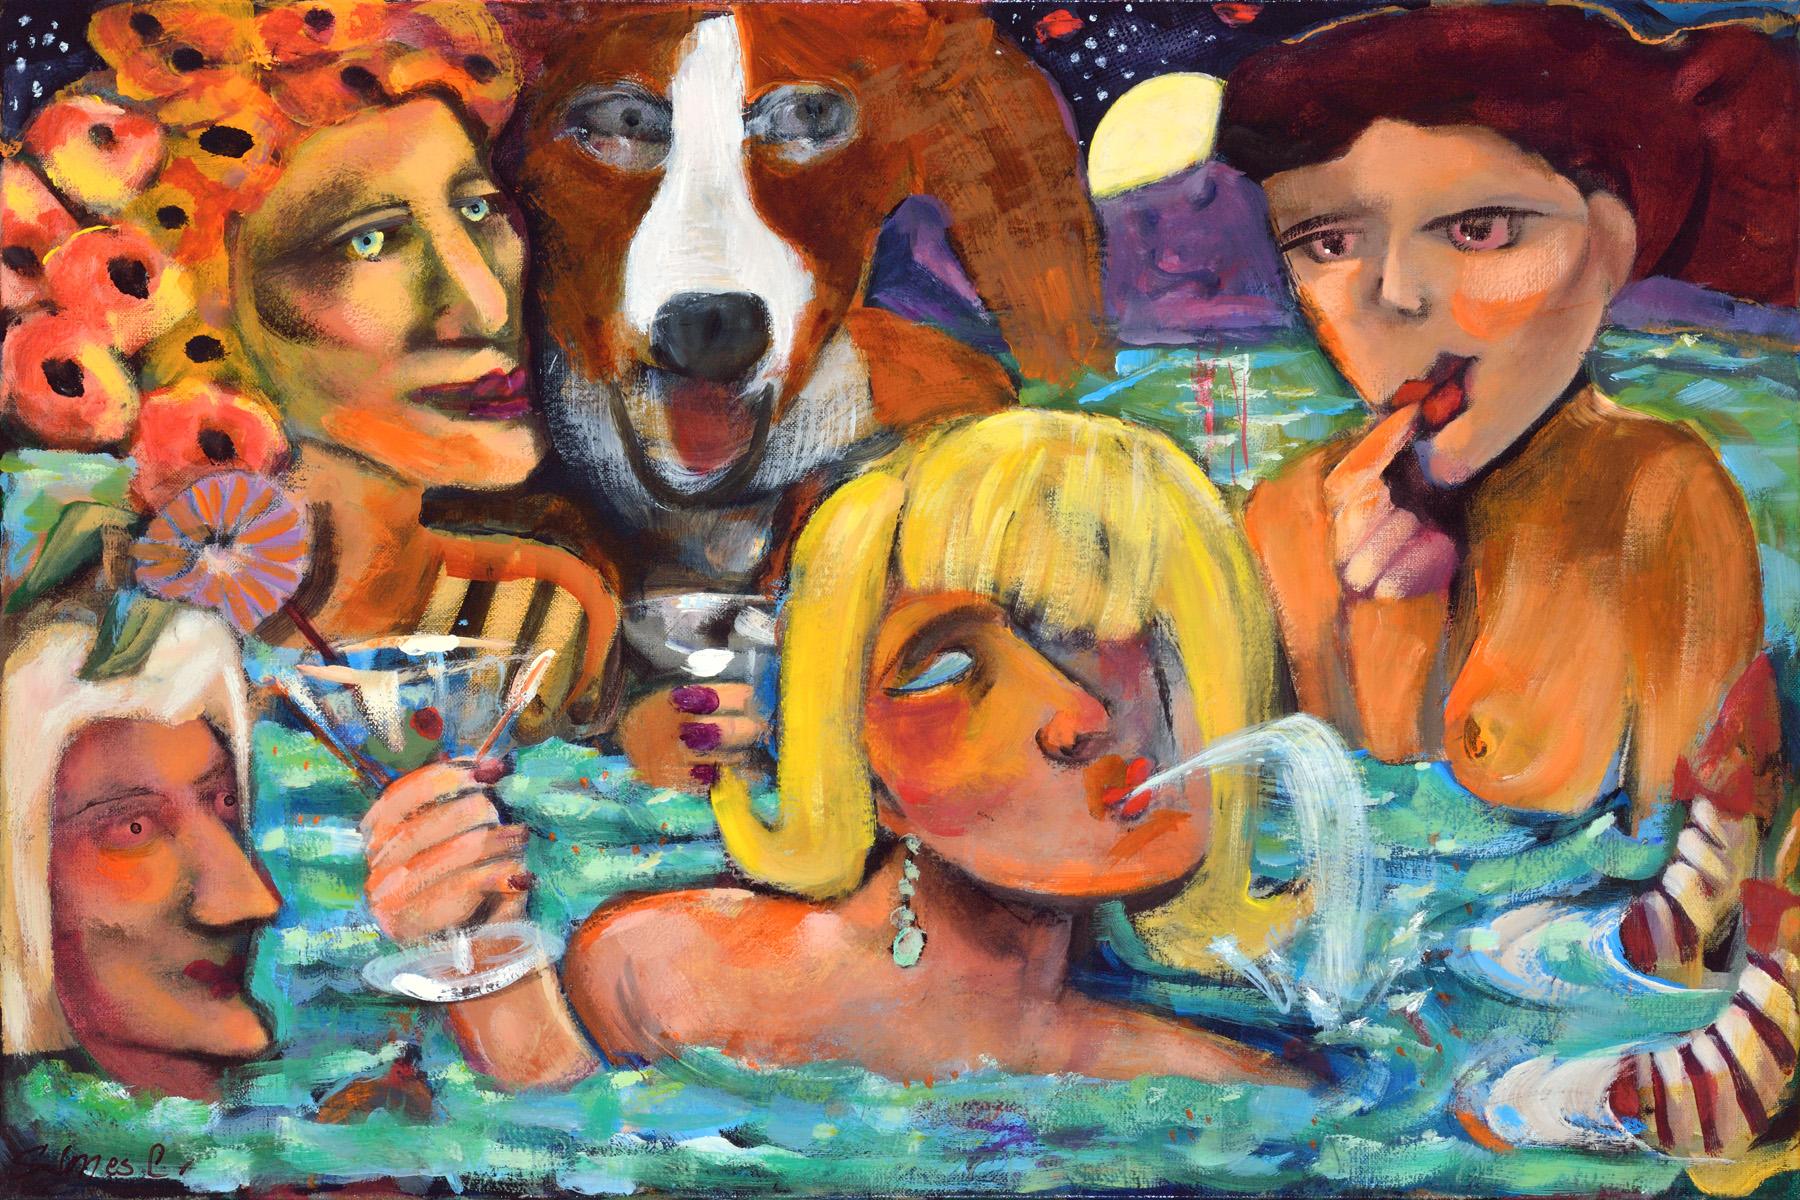 Sandra Jones Campbell Figurative Painting - "Keeping It Real In Coachella" contemporary expressionist figure painting 